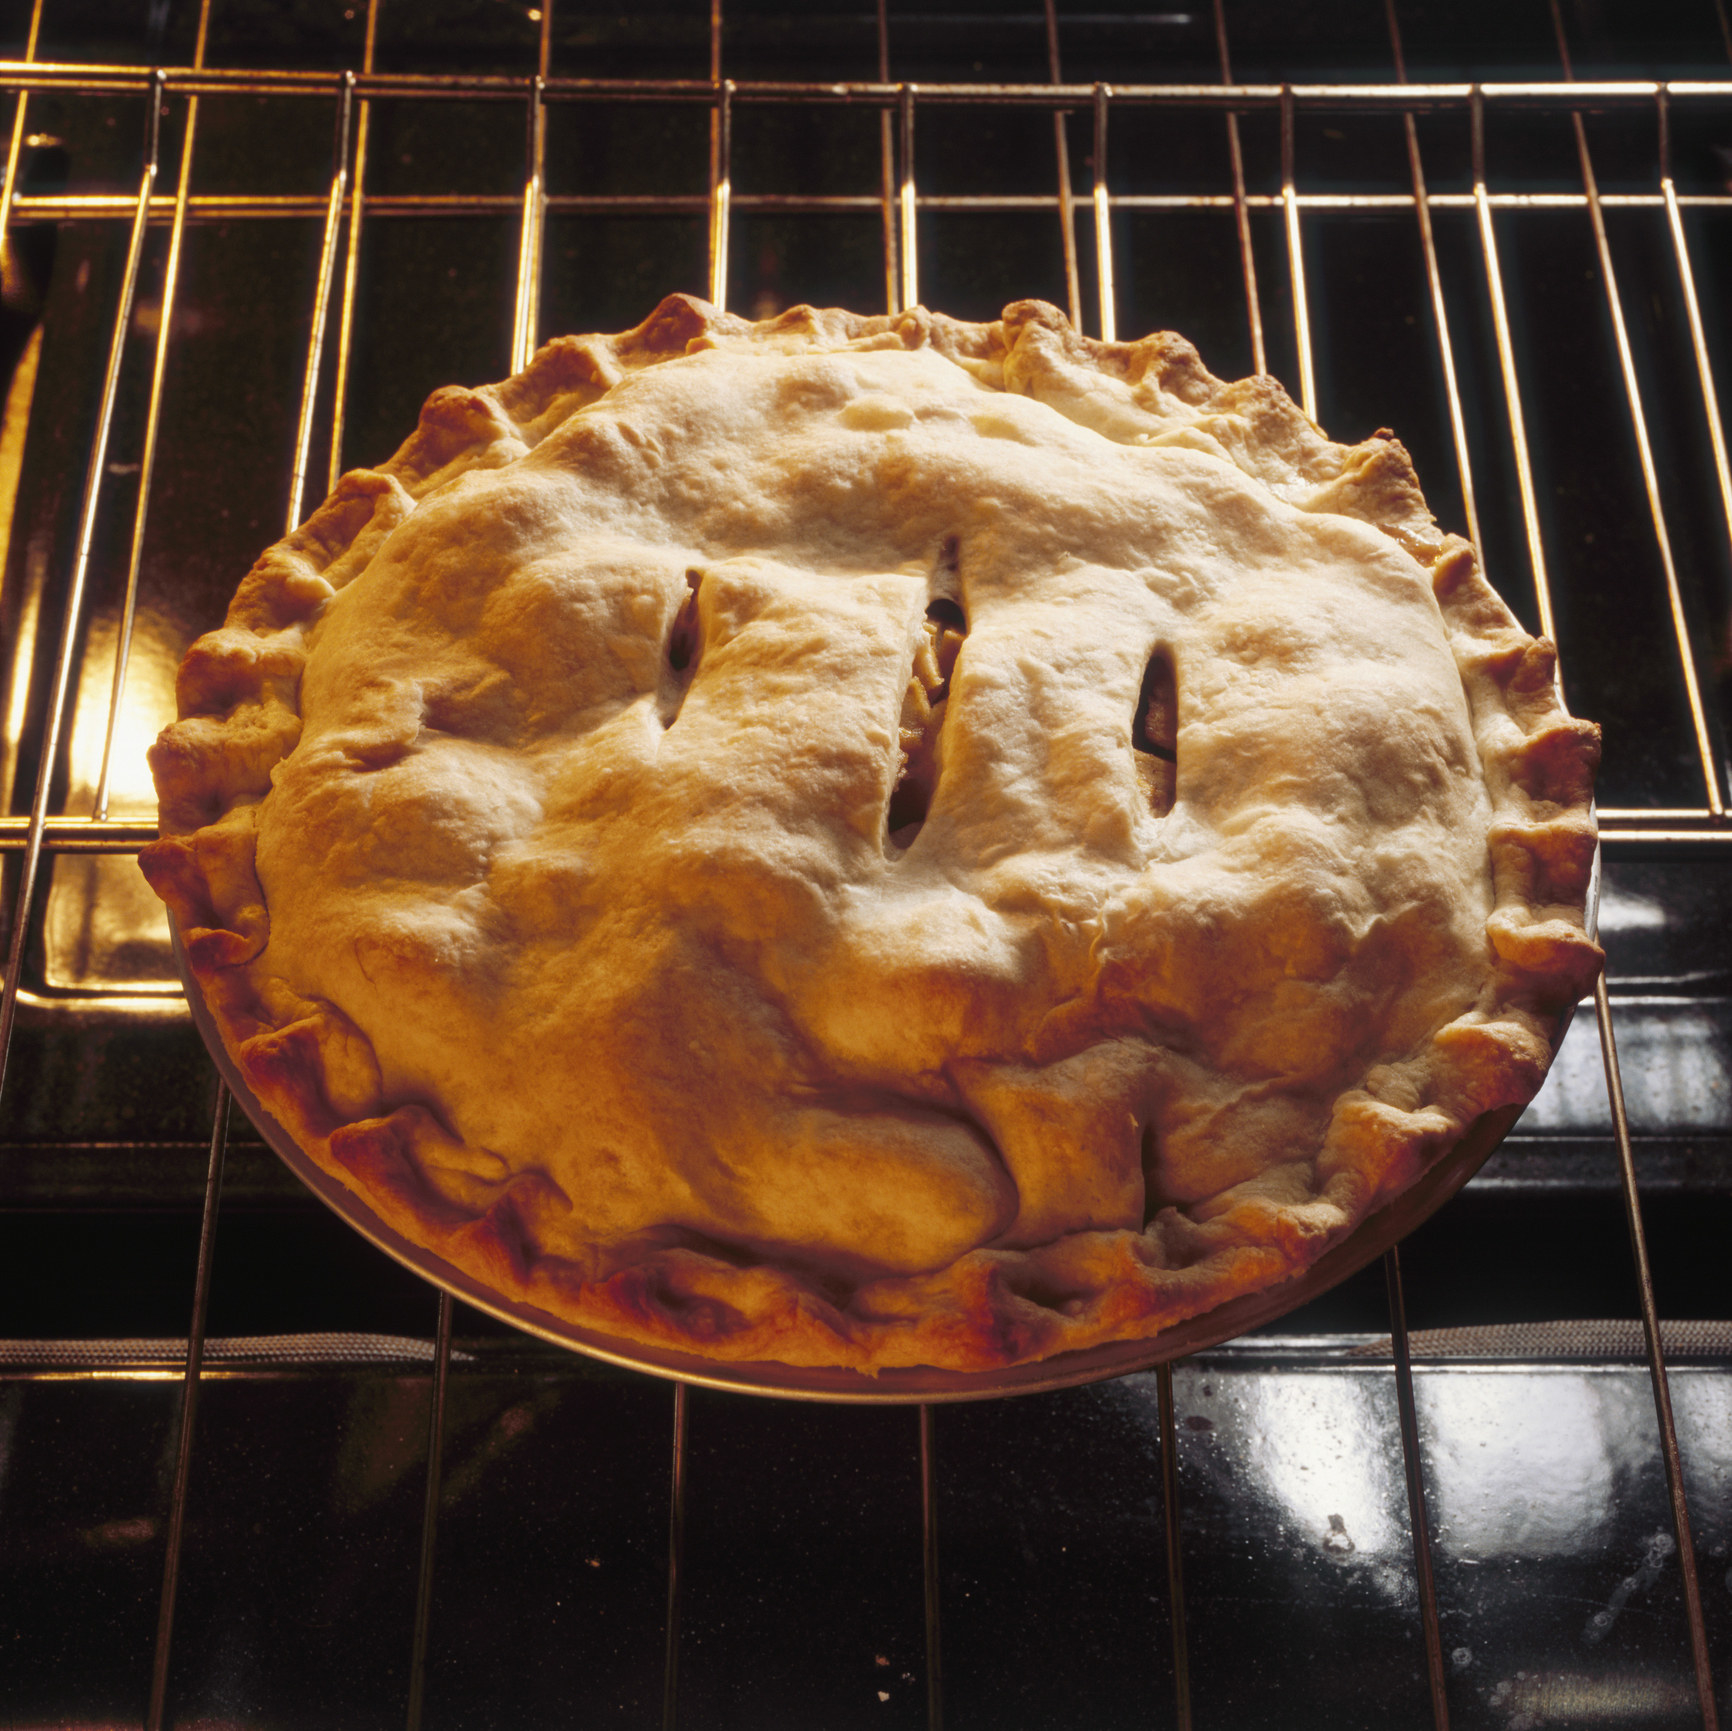 An apple pie in the oven.